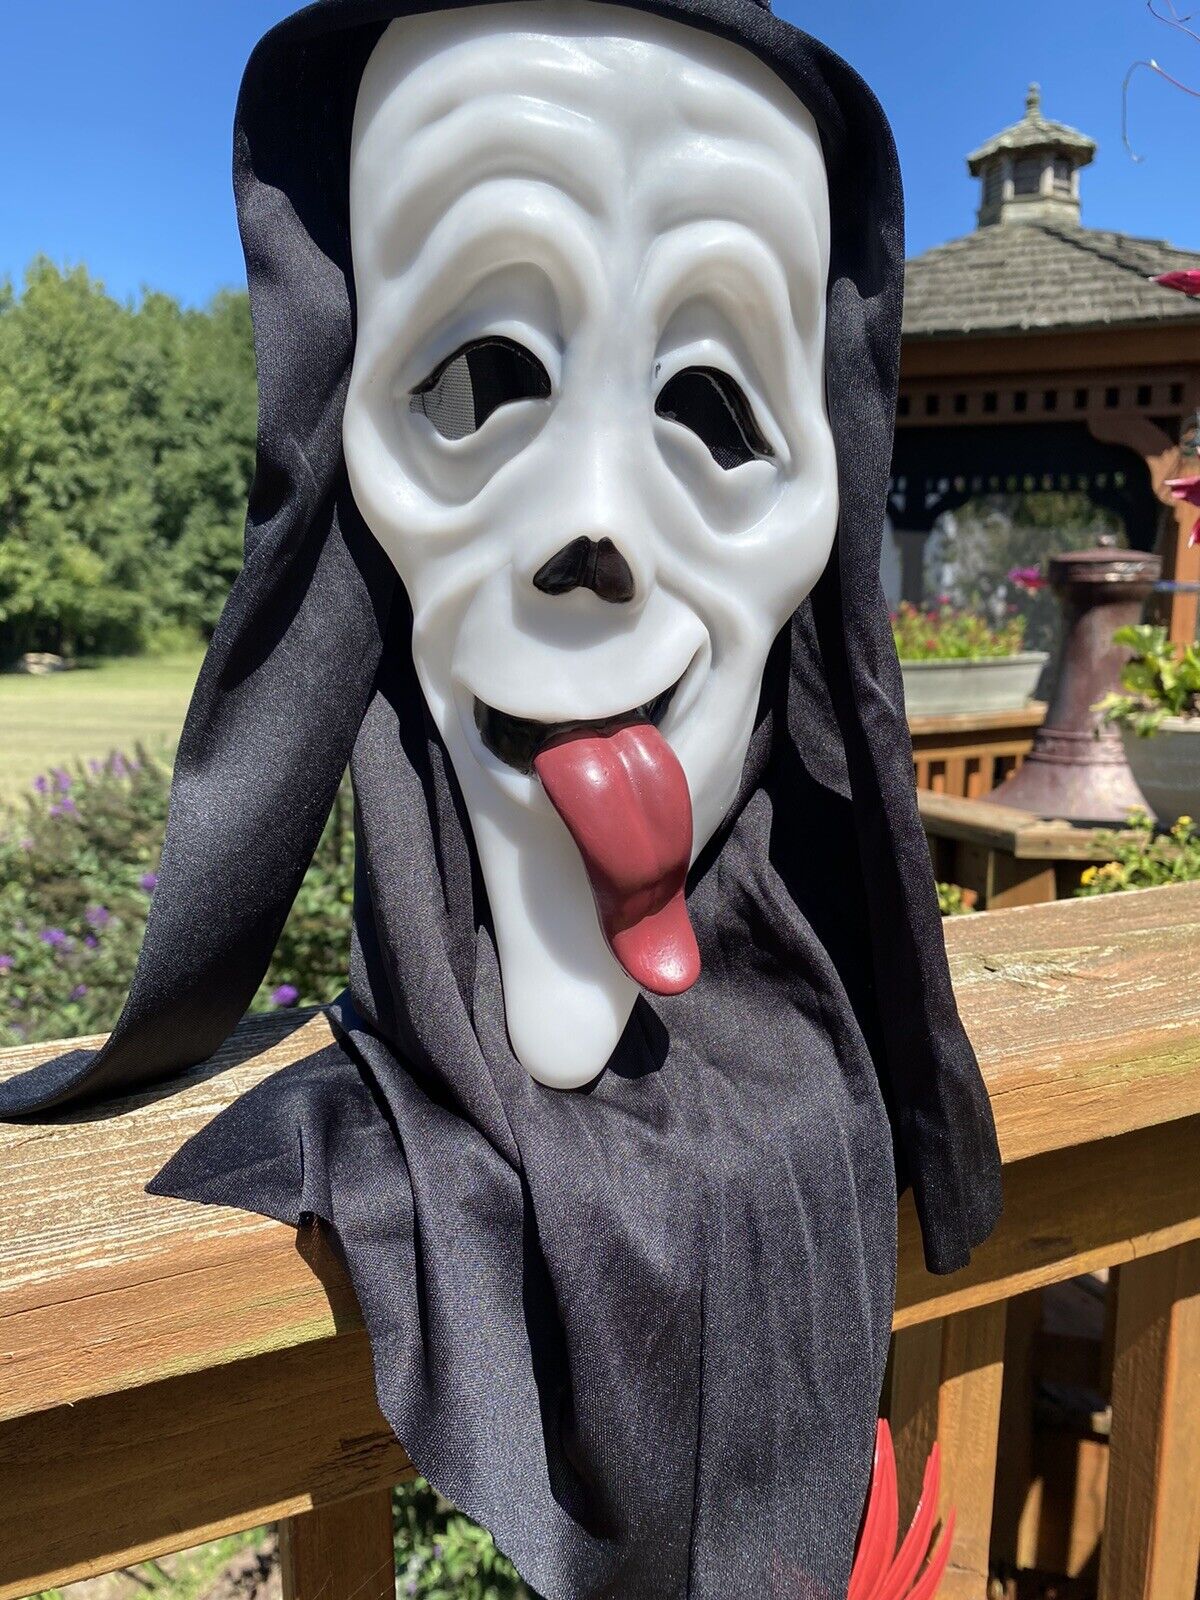 Vintage Scream Ghost Face Whassup Tongue Mask - Easter Unlimited Scary Movie  | eBay